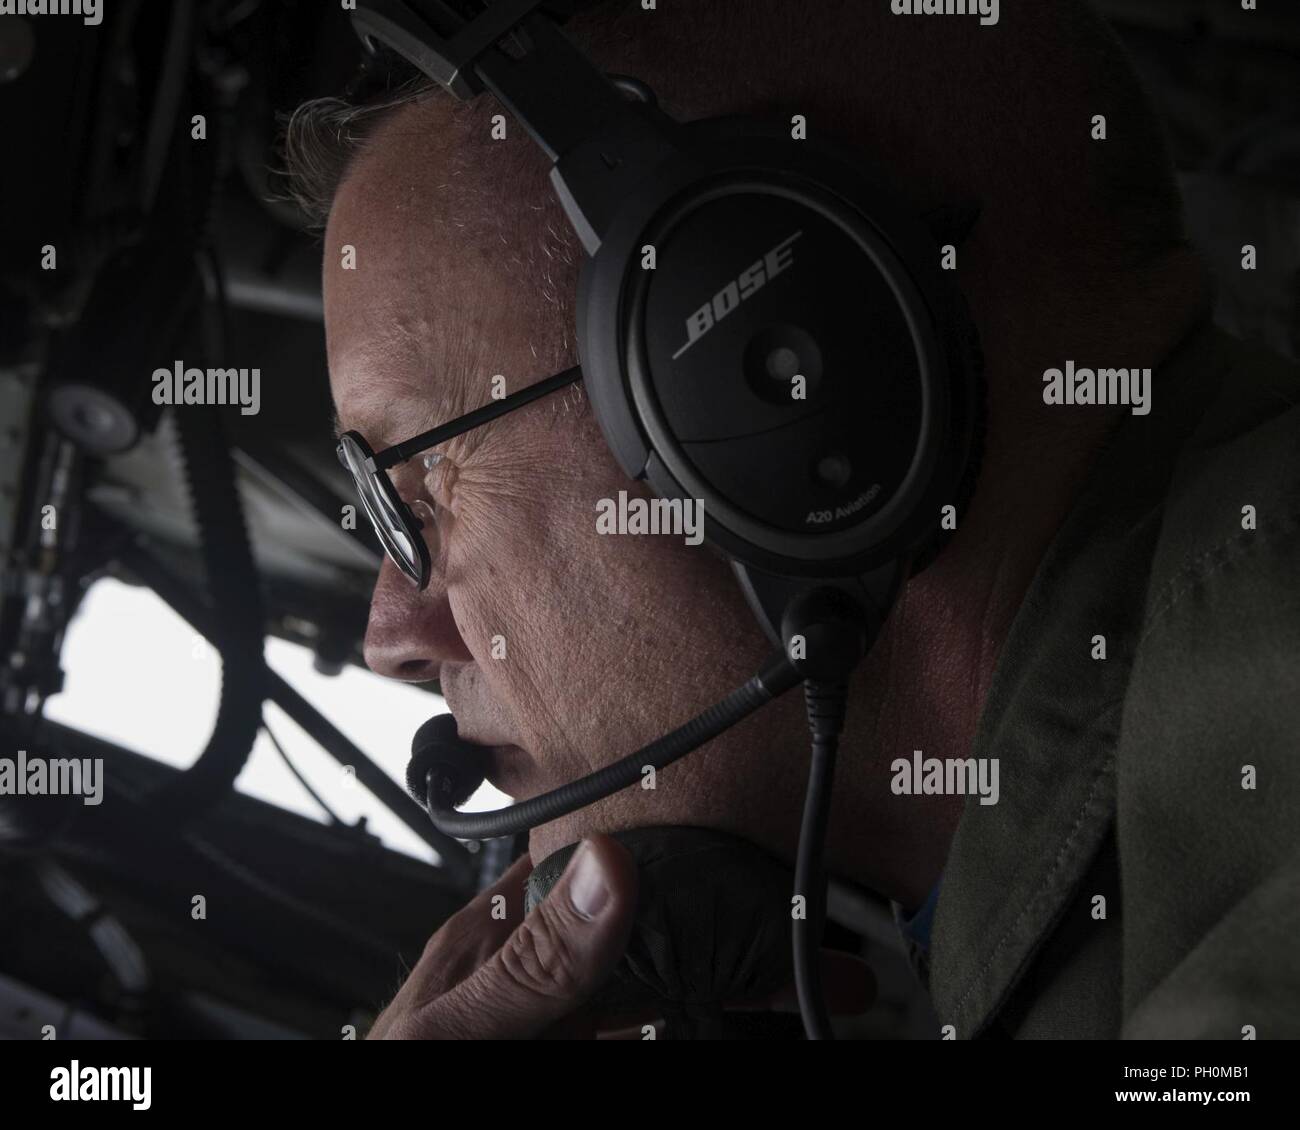 U.S. Air Force Master Sgt. Todd Russell, a boom operator with the 328th Air Refueling Squadron, New York, looks out the boom pod window of a KC-135 Stratotanker with the 121st Air Refueling Wing, Ohio June 15, 2018.  Russell was preparing to refuel an F-15E Strike Eagle with the 4th Fighter Wing at Seymour Johnson Air Force Base, North Carolina. Stock Photo